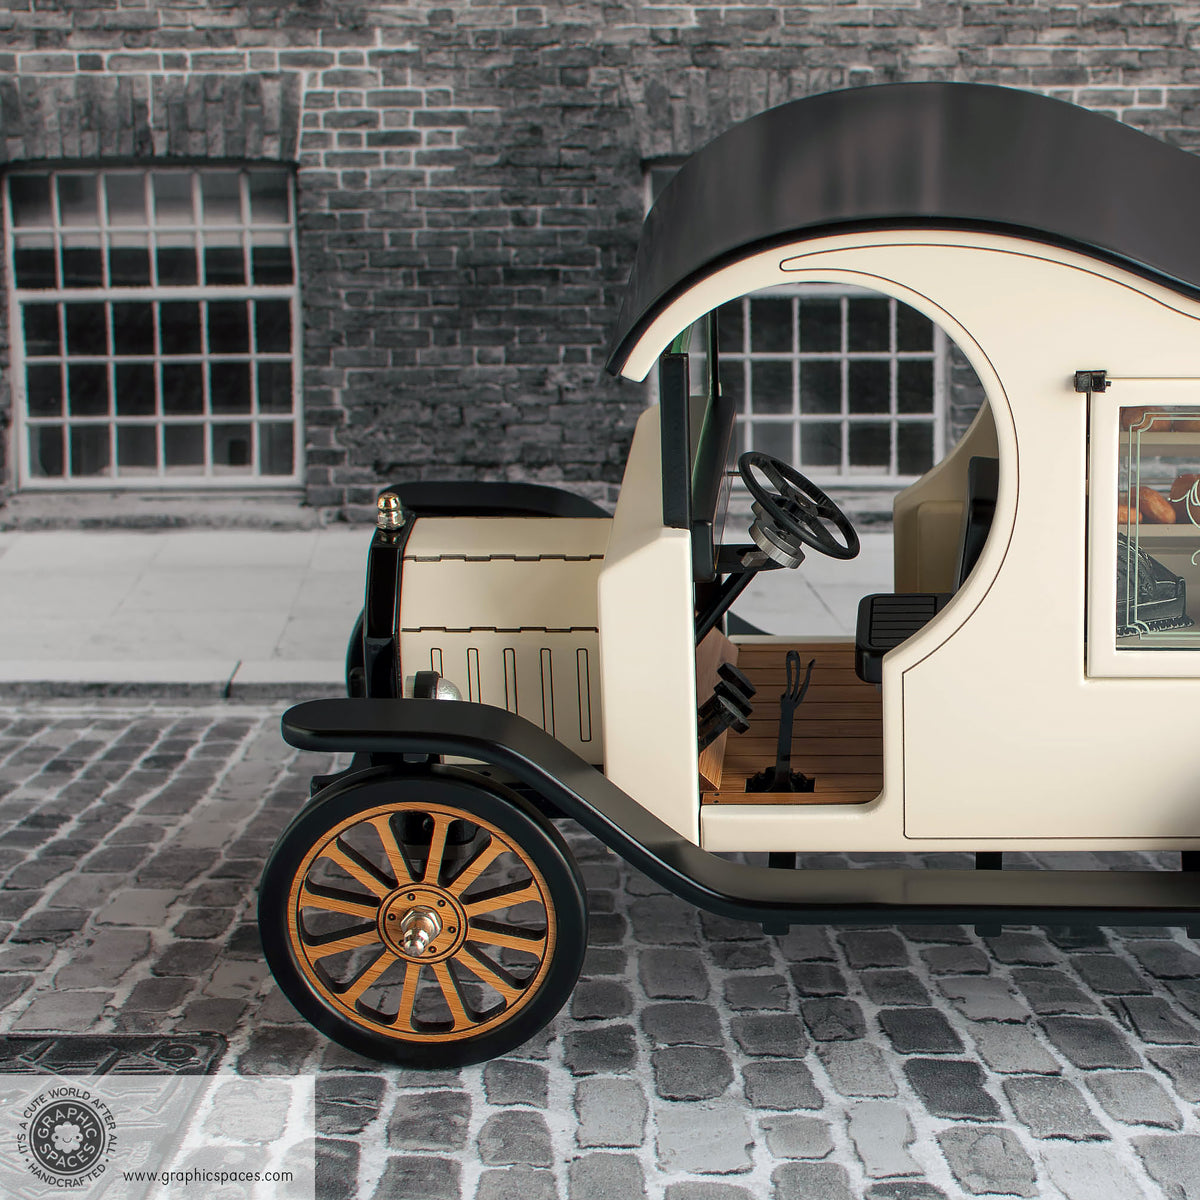 1:12 Scale Room Box White Bakery Shop Truck Model T C Cab. Front side view showing floor, steering wheel, seat and pedals.